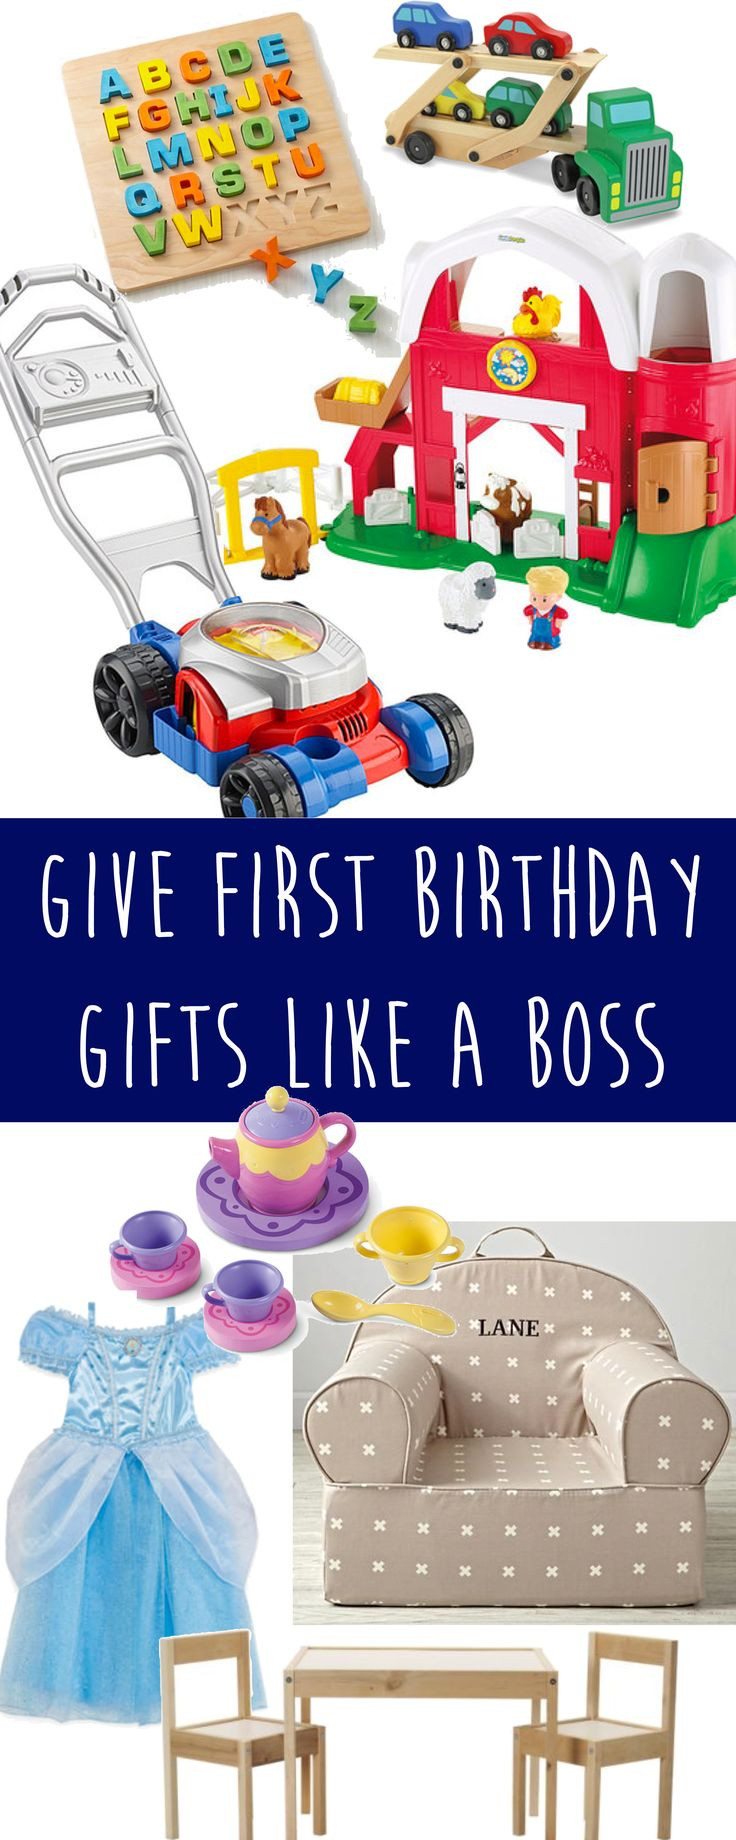 Best Gifts For Baby'S First Birthday
 25 Best Ideas about First Birthday Gifts on Pinterest